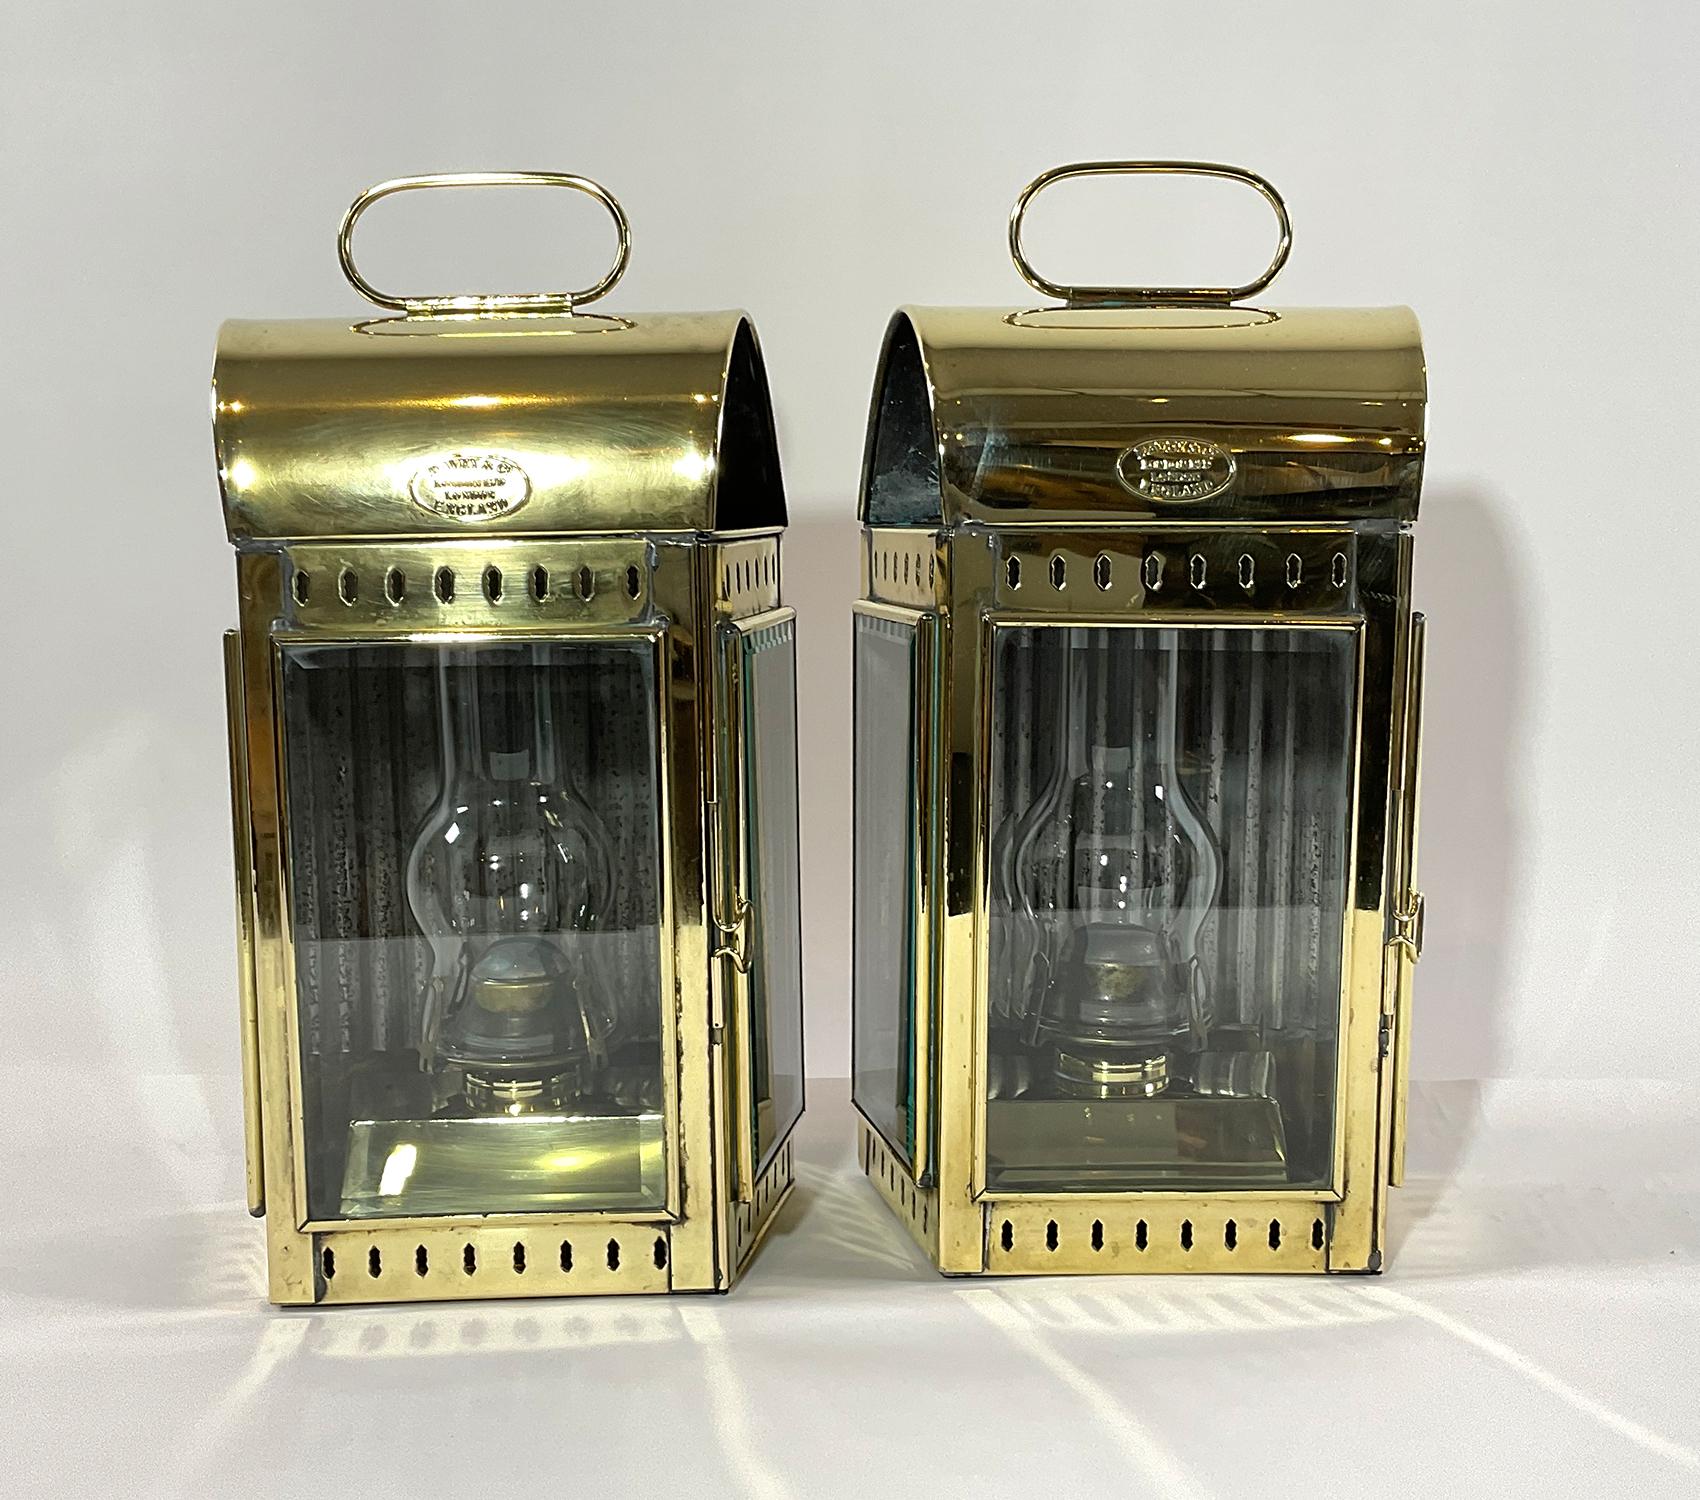 Pair of top quality solid brass ships lanterns with oval makers badges from Davey and Company of London, England. This pair has original burners, oil tanks, chimneys, beveled glasses, hinged doors and carry handles. Circa 1930.